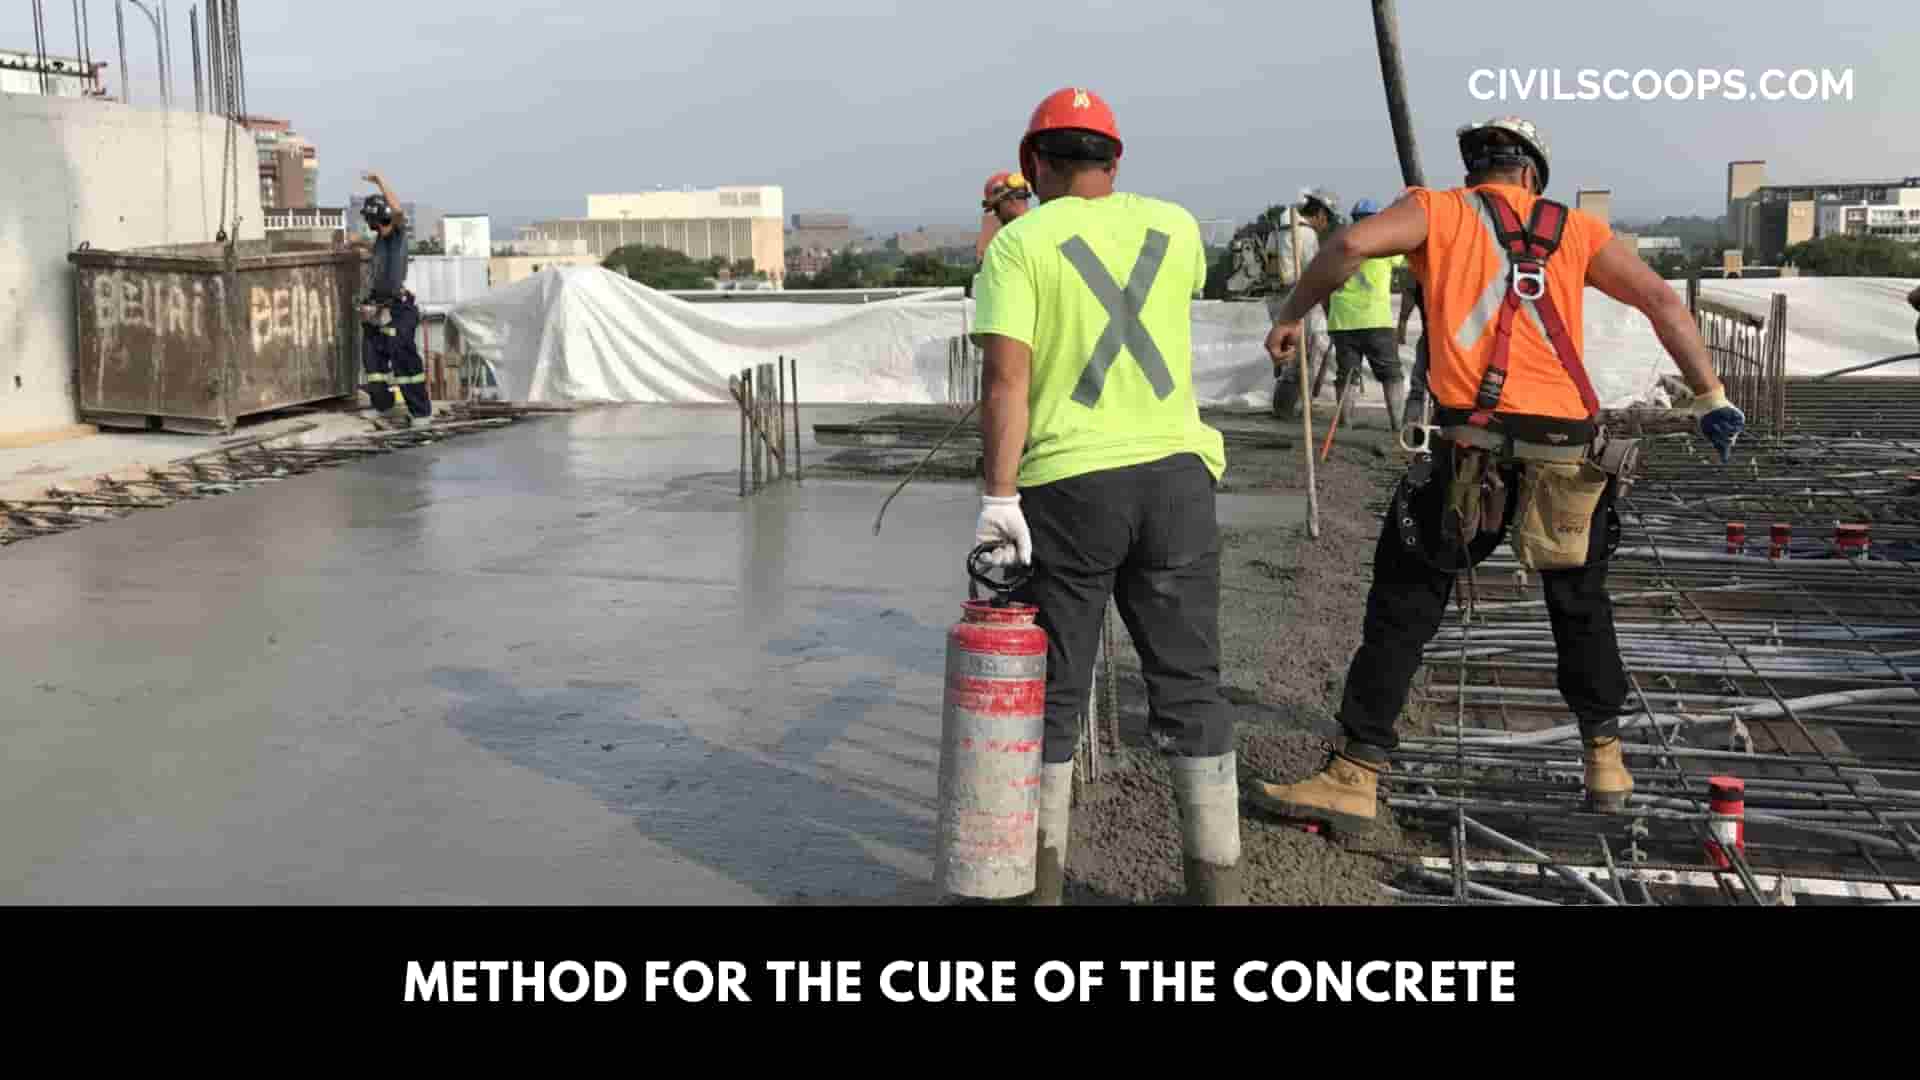 Method for the Cure of the Concrete: